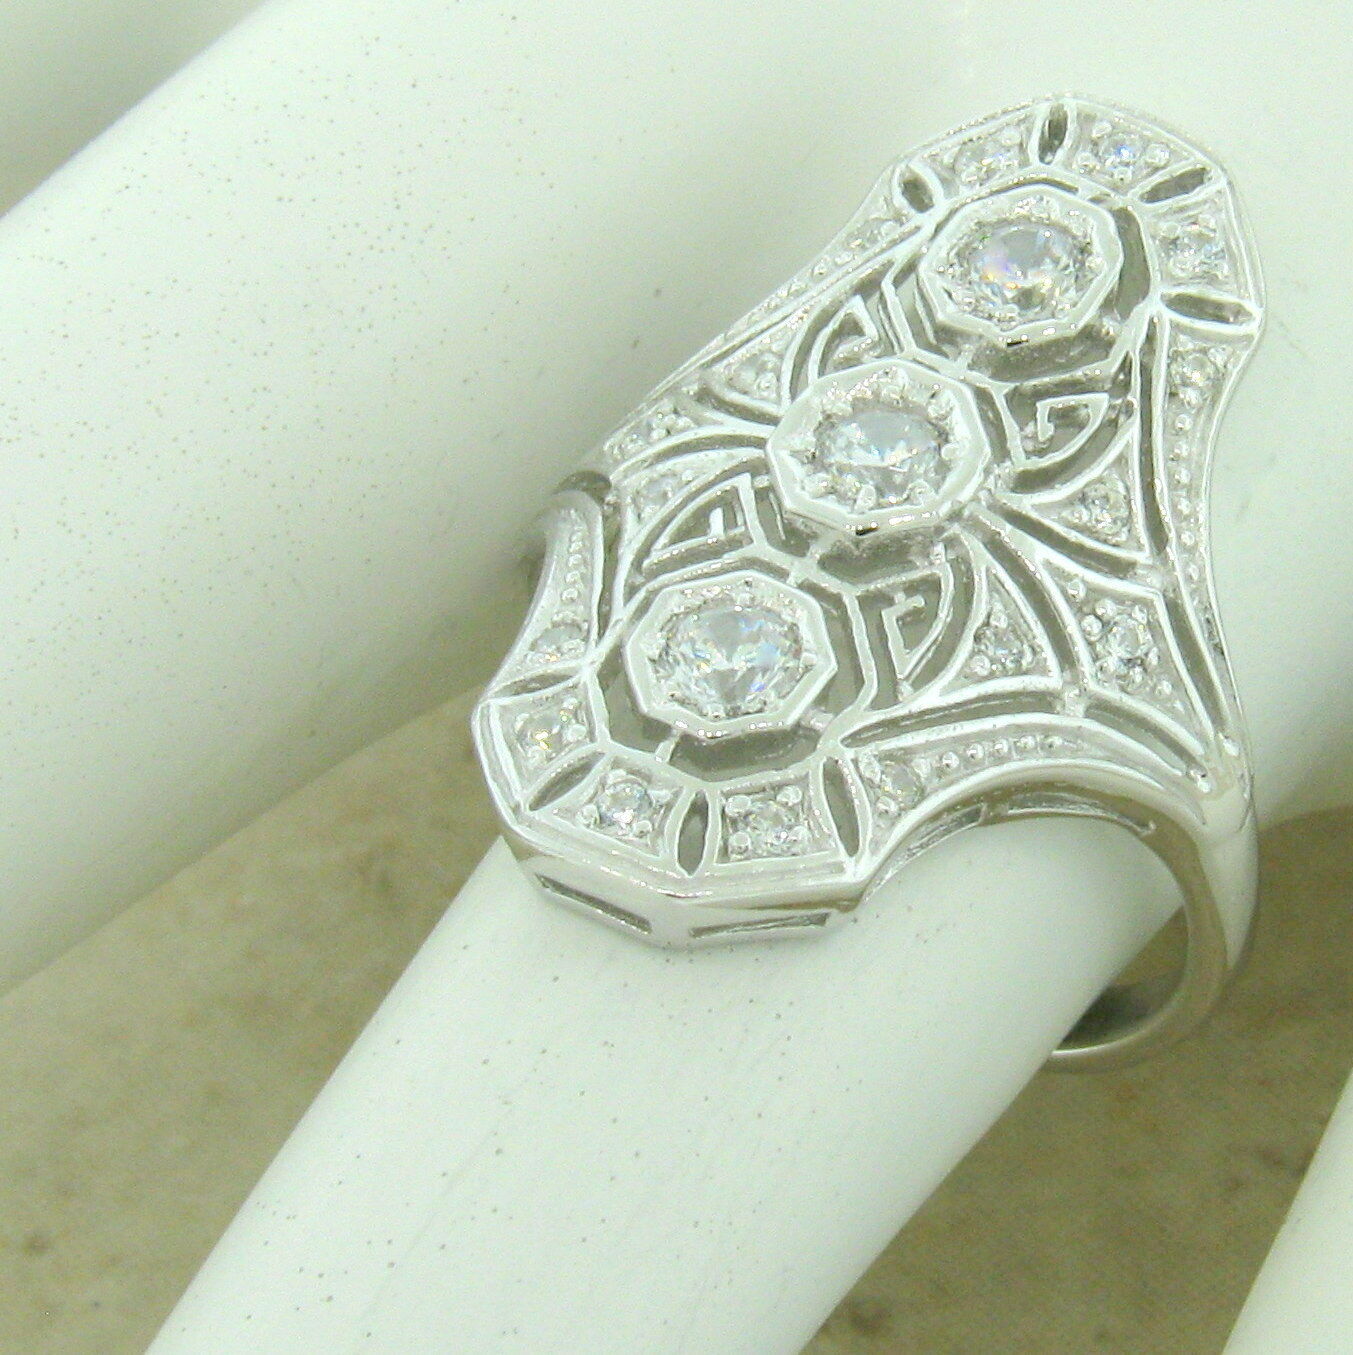 ART DECO RING 925 STERLING SILVER ANTIQUE STYLE CUBIC ZIRCONIA,            #1149